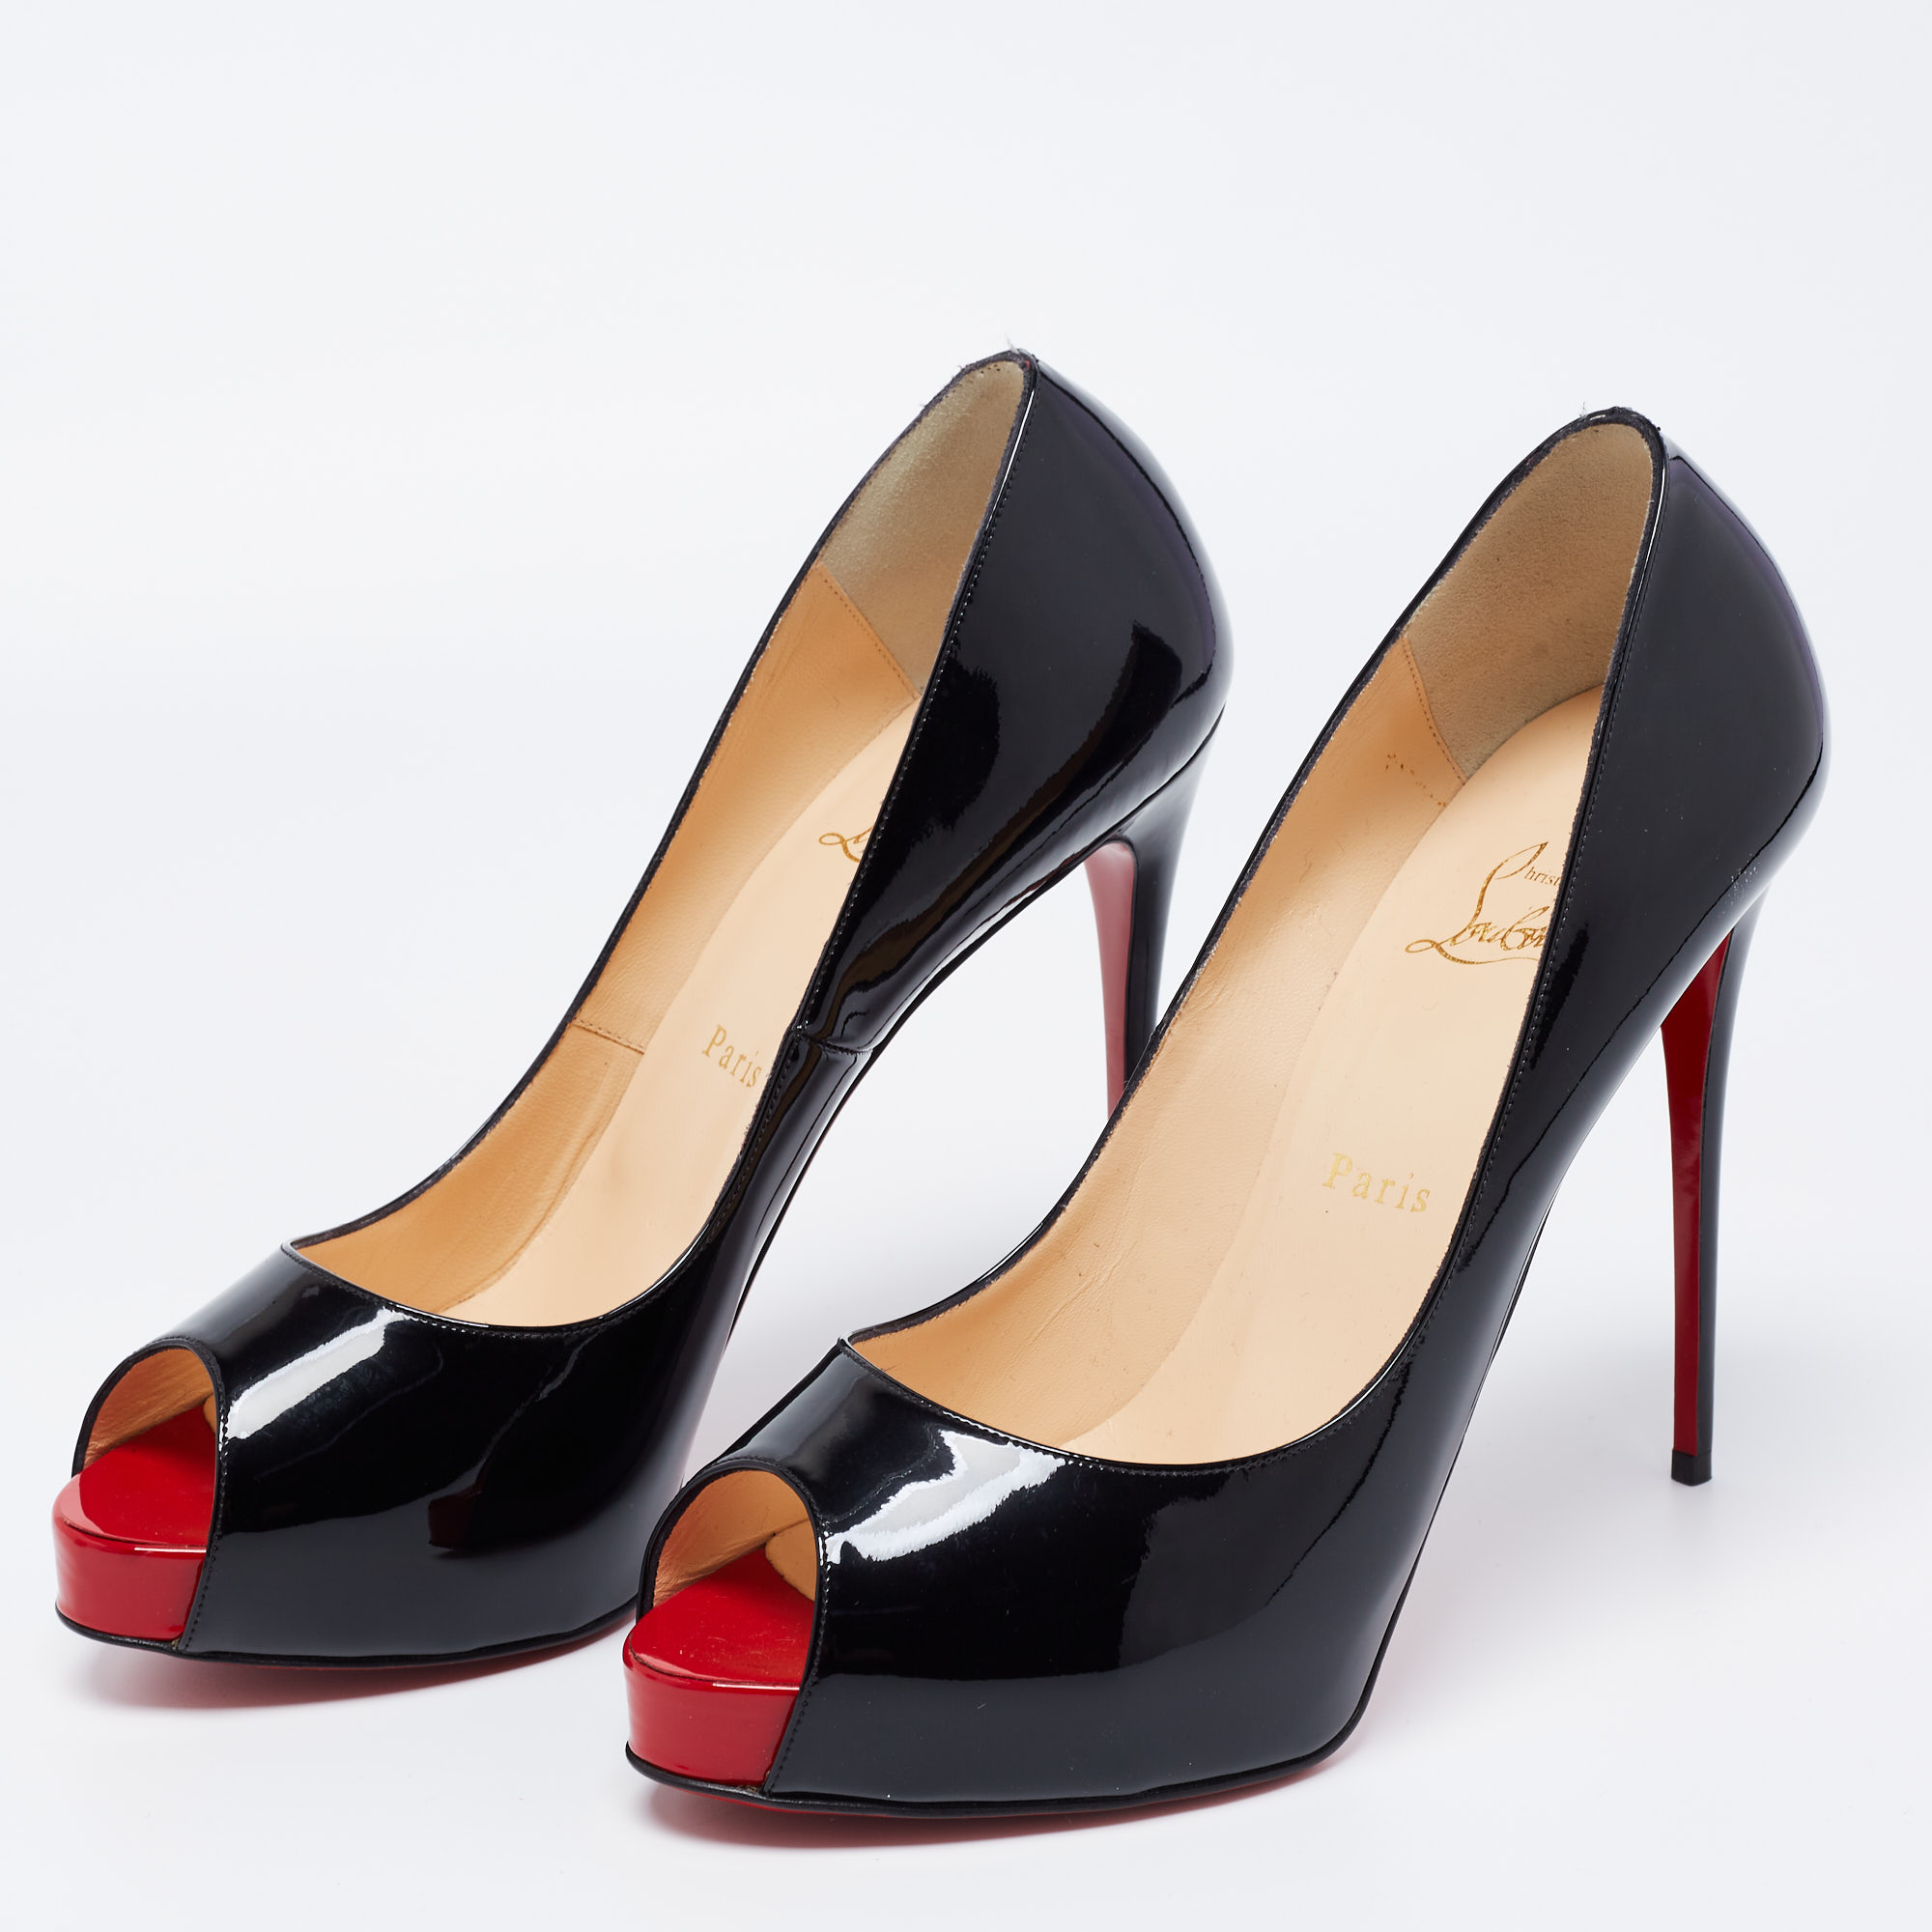 

Christian Louboutin Black Patent Leather New Very Prive Peep-Toe Pumps Size